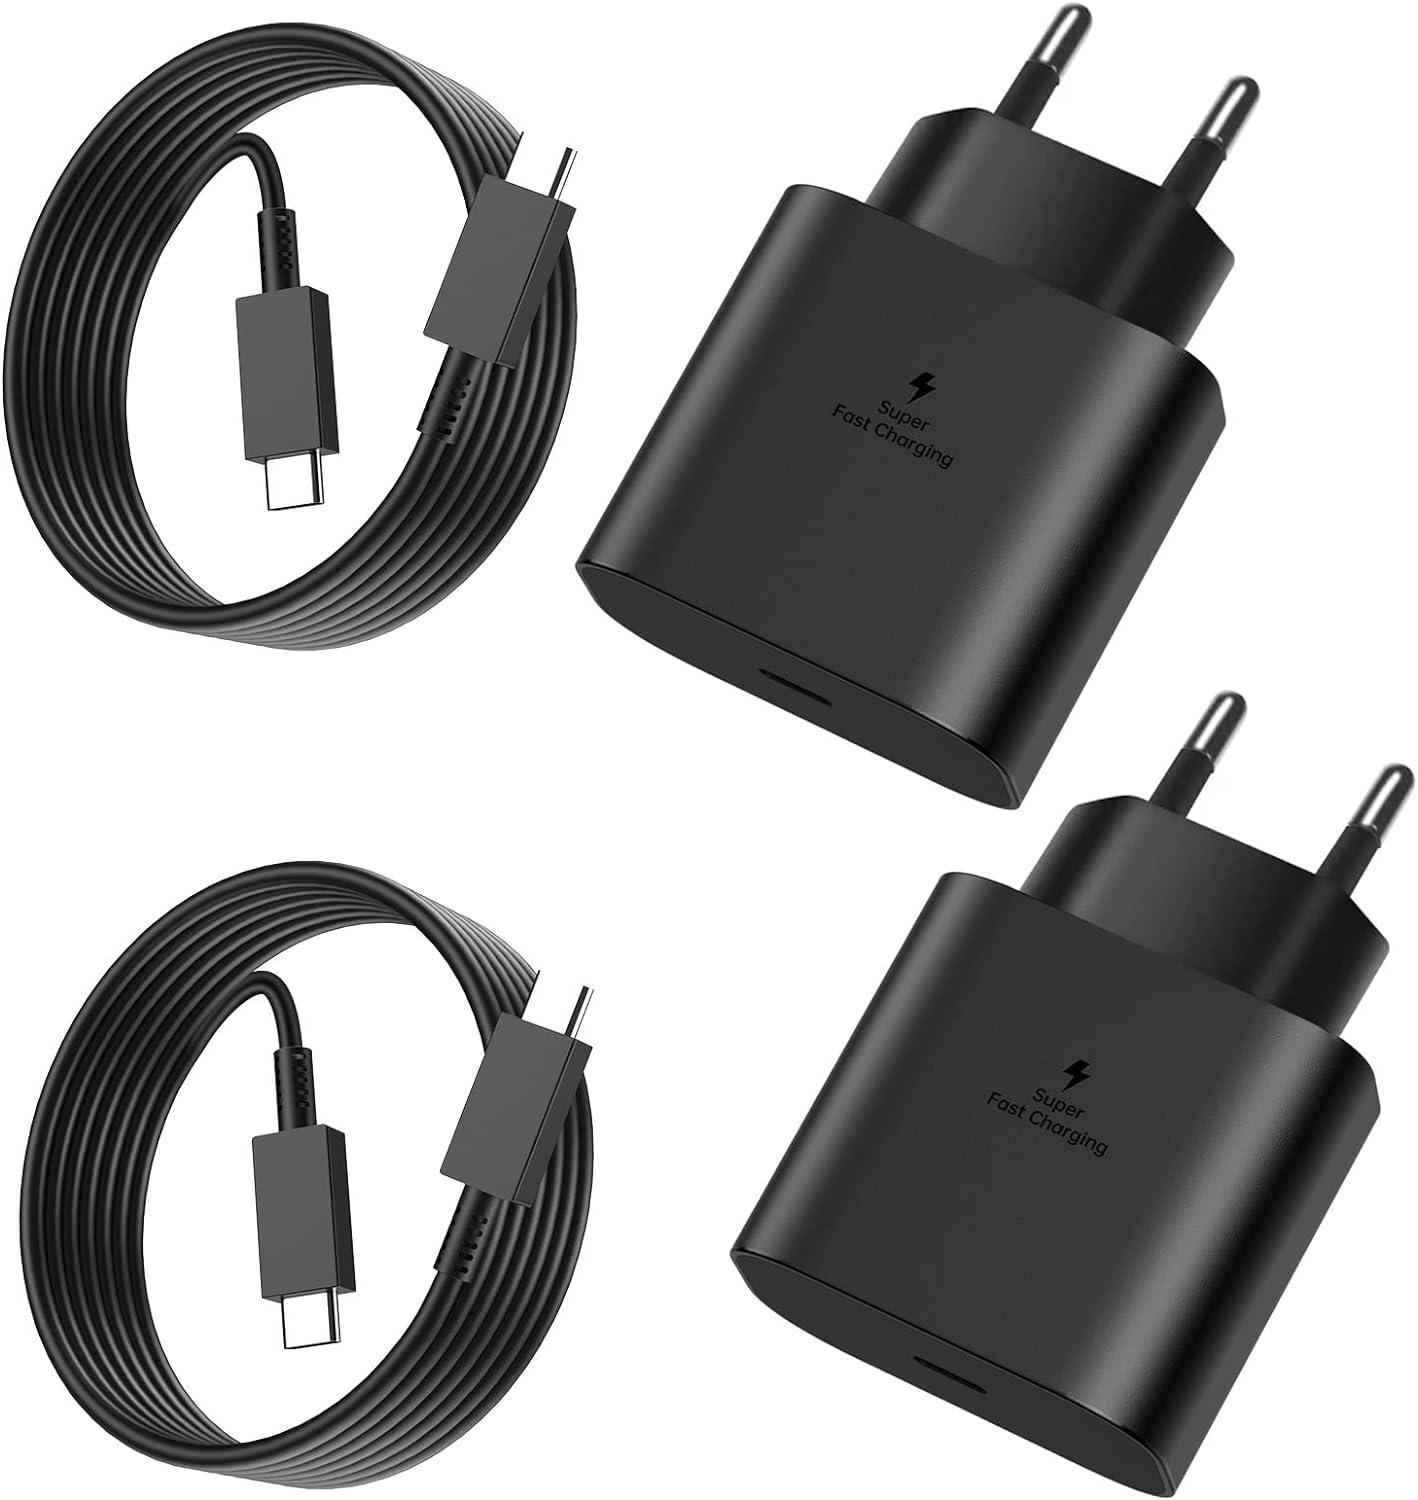 Pack of 2 25 W USB C Charger, Super Fast Charger with 2 m Charging Cable, Type C Mobile Phone Power Supply Adapter for Samsung Galaxy S23/S22/S21 Ultra/S21+/S20/Note20/S10/S9, iPhone 15 Pro/iPad Pro,